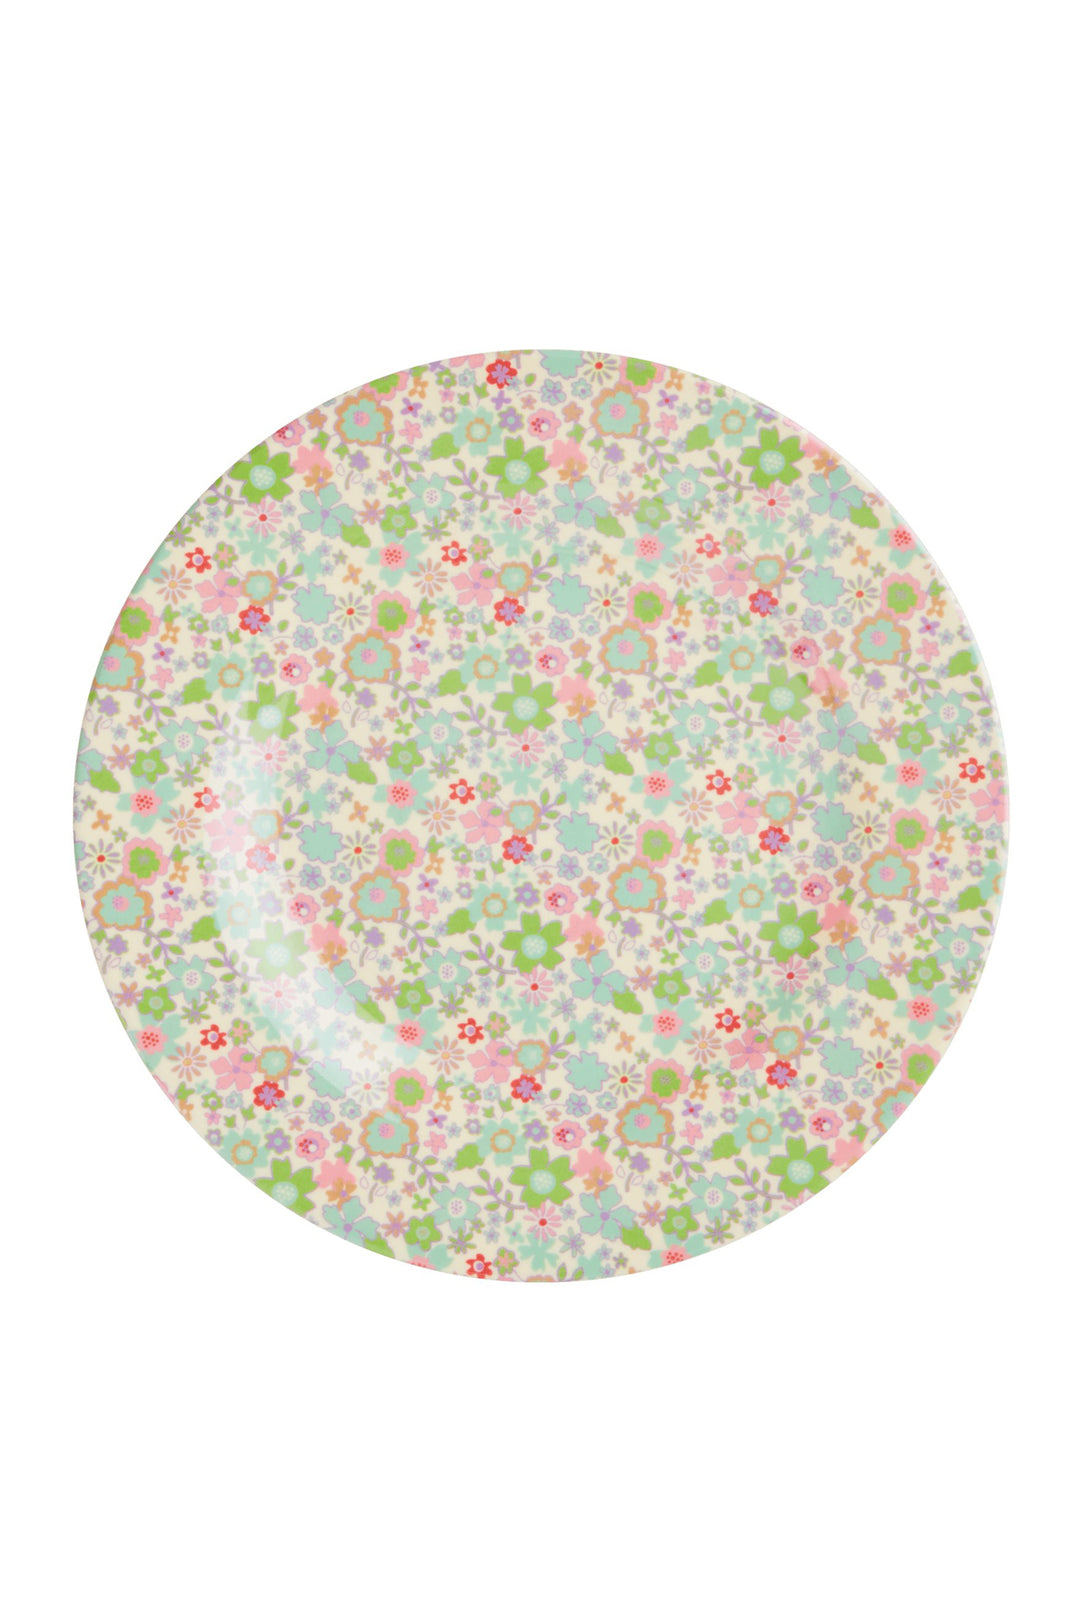 Pastel Fall Floral Melamine Round Plate